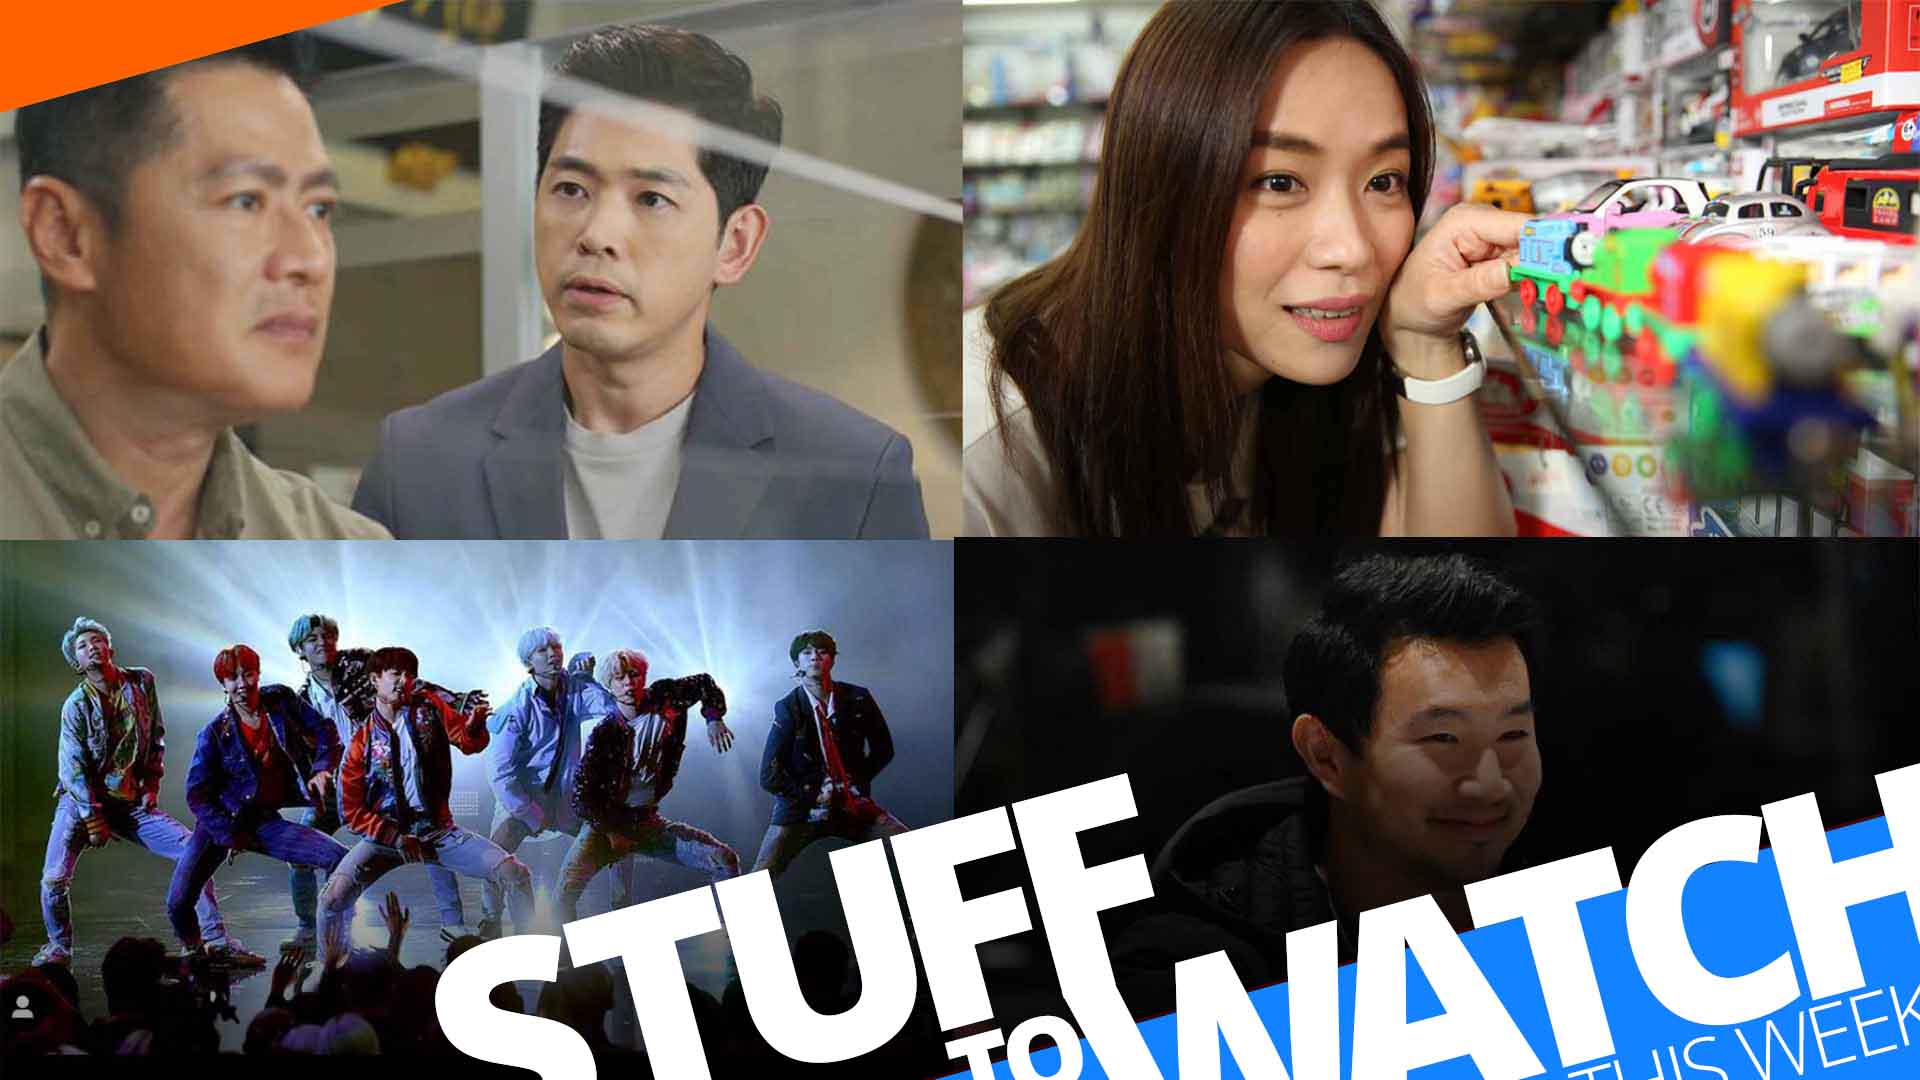 Rebecca Lim runs a vintage shop in a new infotainment series; Simu Liu takes over ‘Saturday Night Live’. Cats and dogs living together — it's mass hysteria!